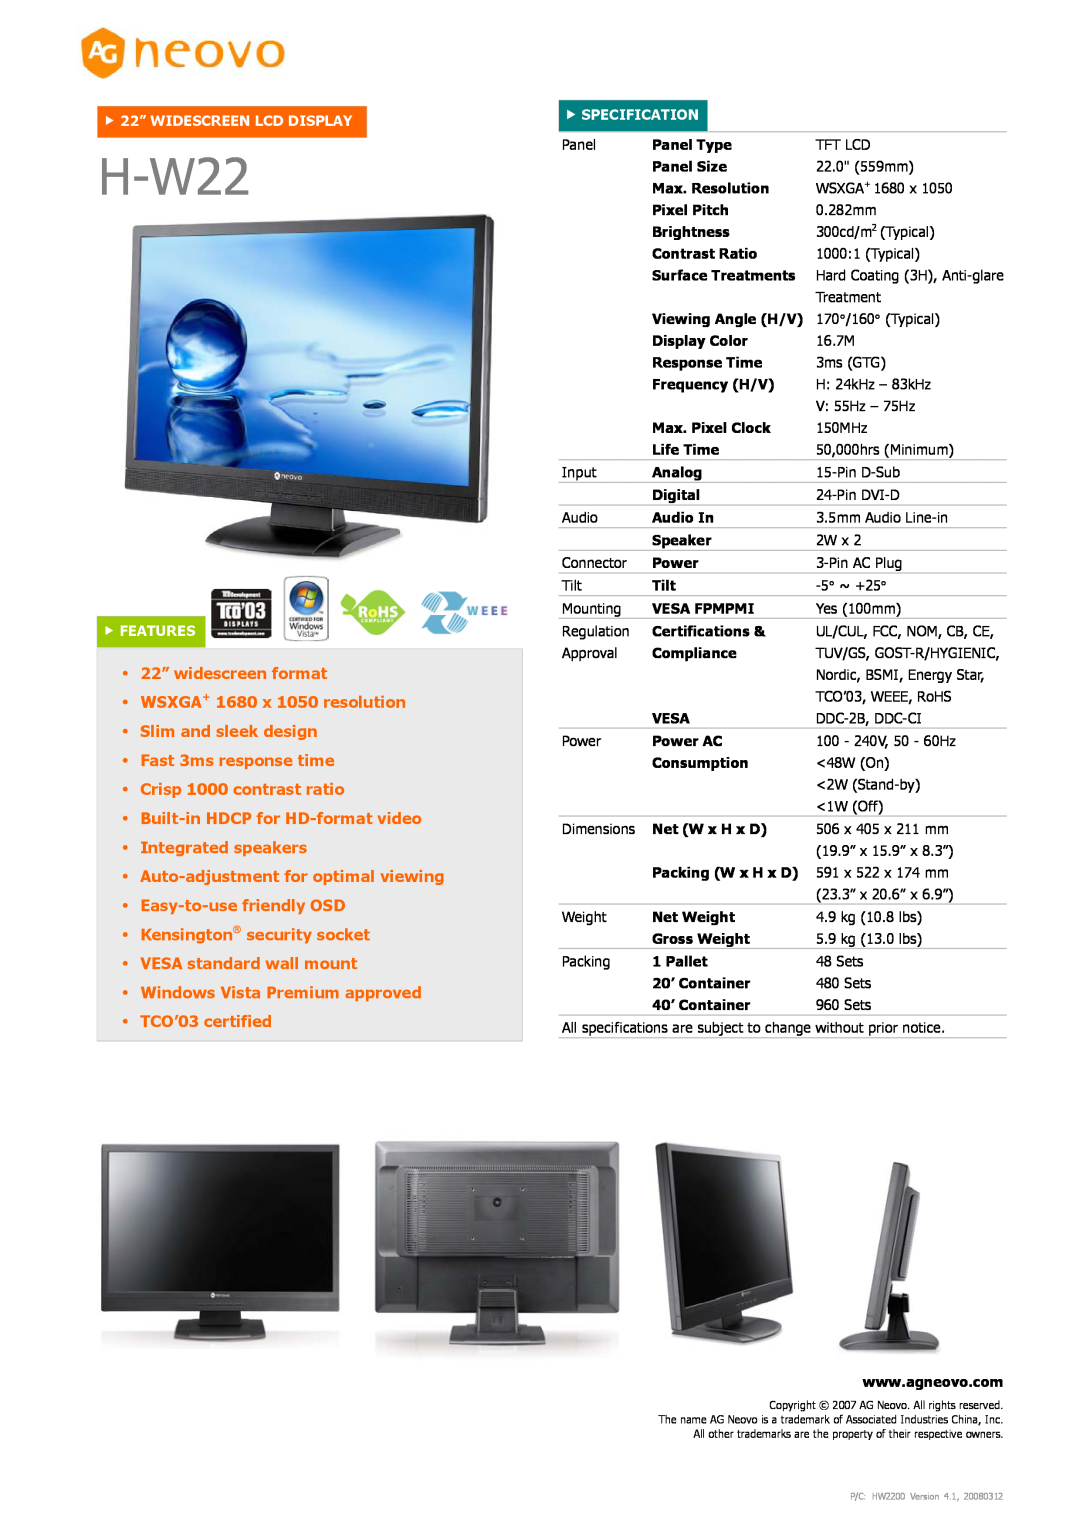 AG Neovo H-W22 dimensions 22” widescreen format, WSXGA+ 1680 x 1050 resolution Slim and sleek design, f FEATURES 